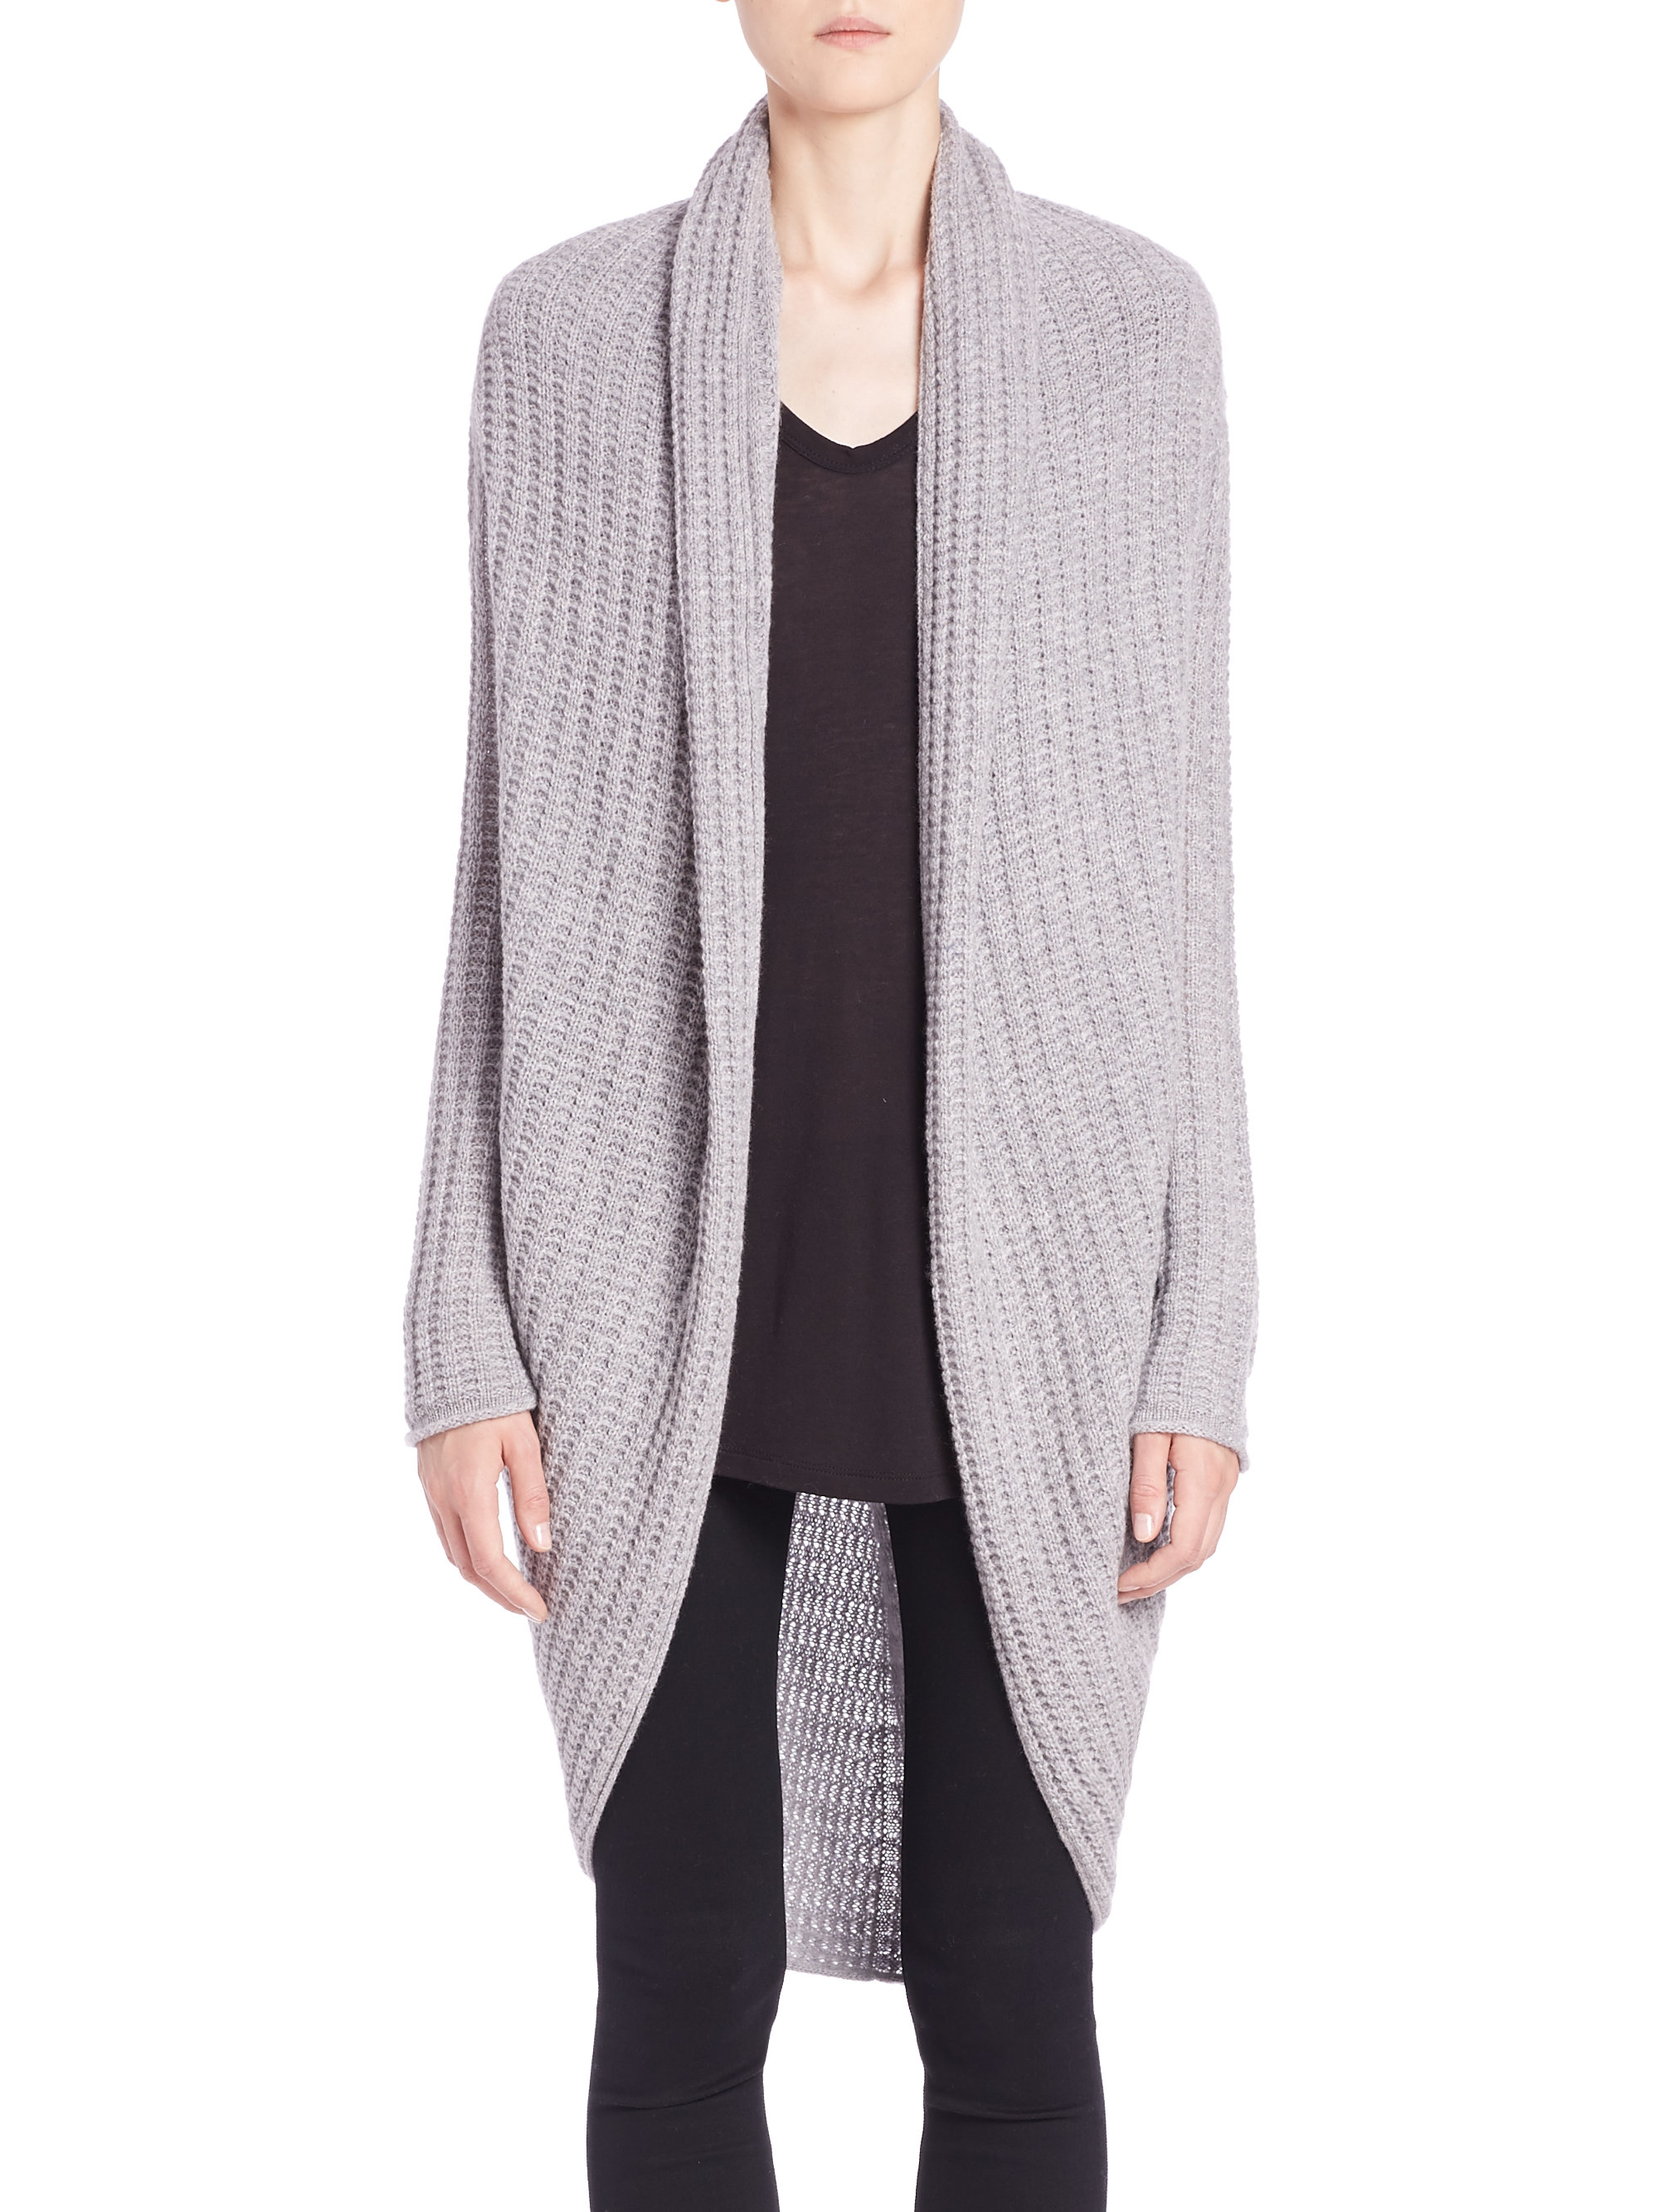 360cashmere Josephine Cashmere Cocoon Sweater in Grey (Gray) - Lyst